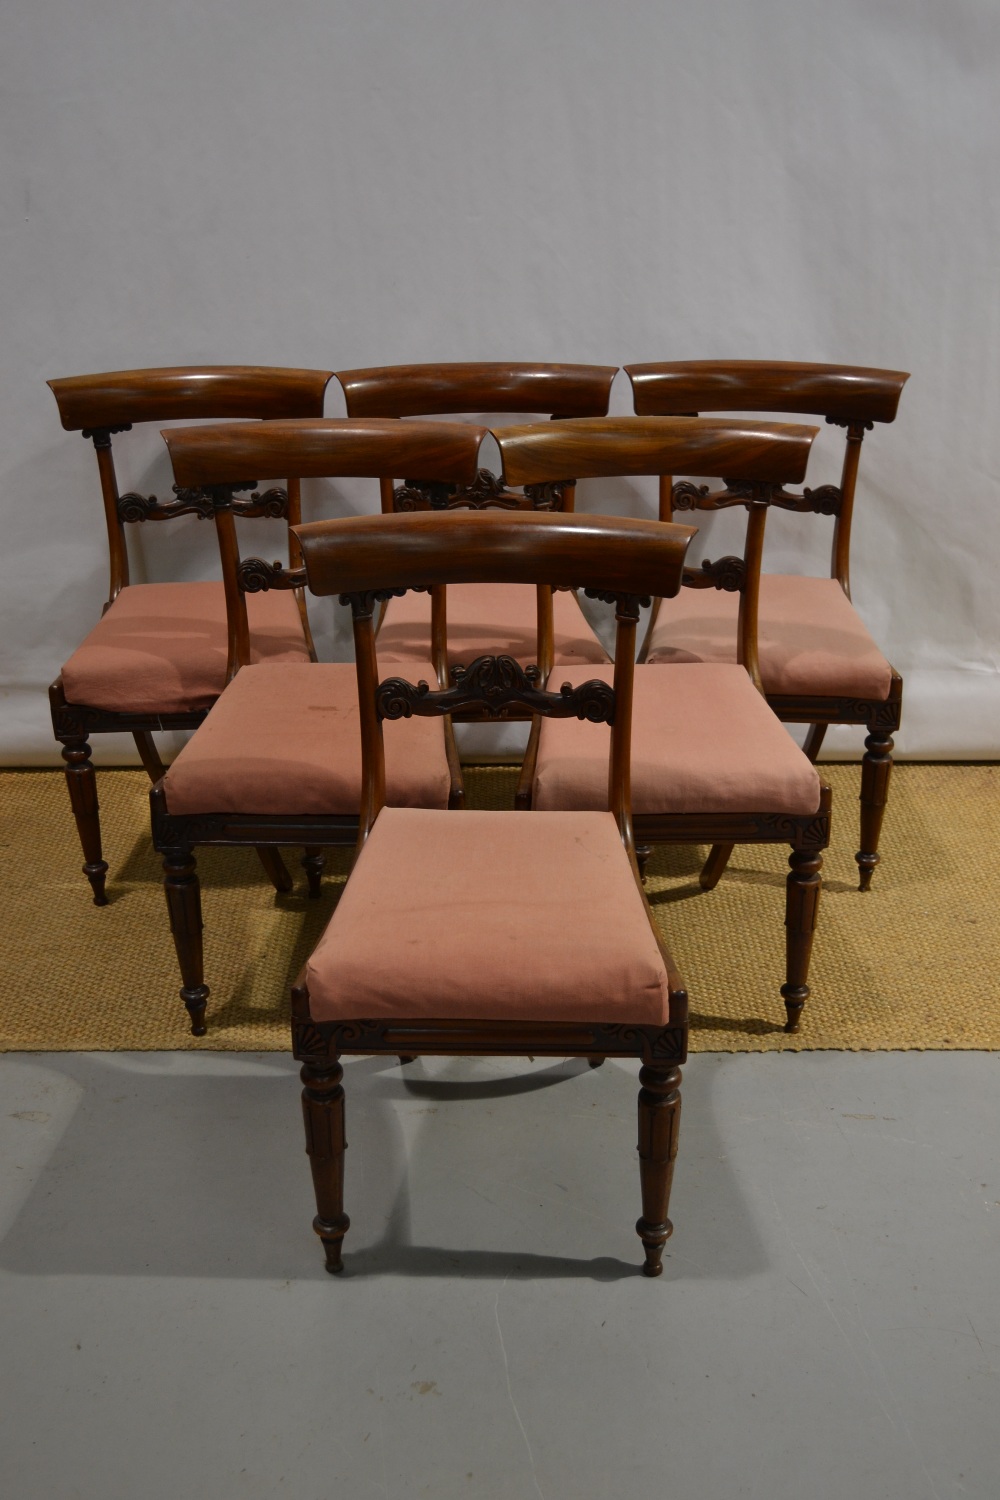 A set of six early Victorian mahogany side chairs, the backs with foliage carved rails and carved